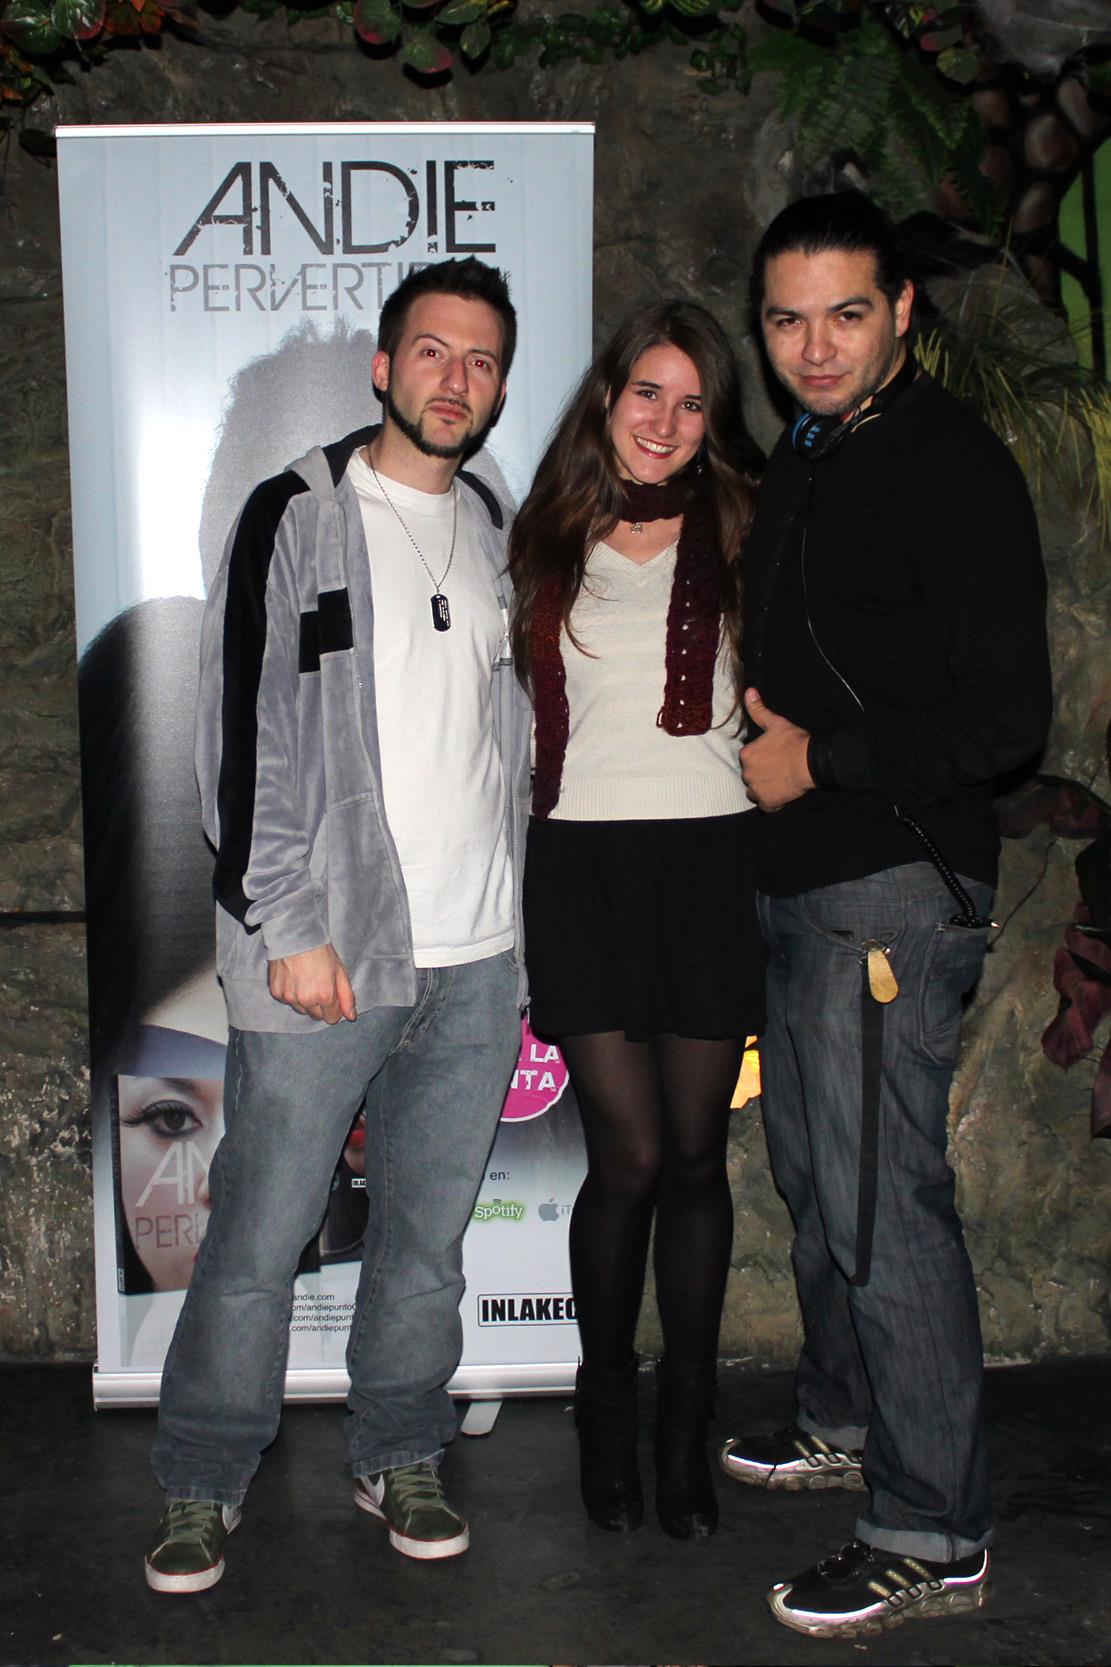 Photocall at the premiere of Andie's and Say's singles. With Dj Kun and Juanito Say